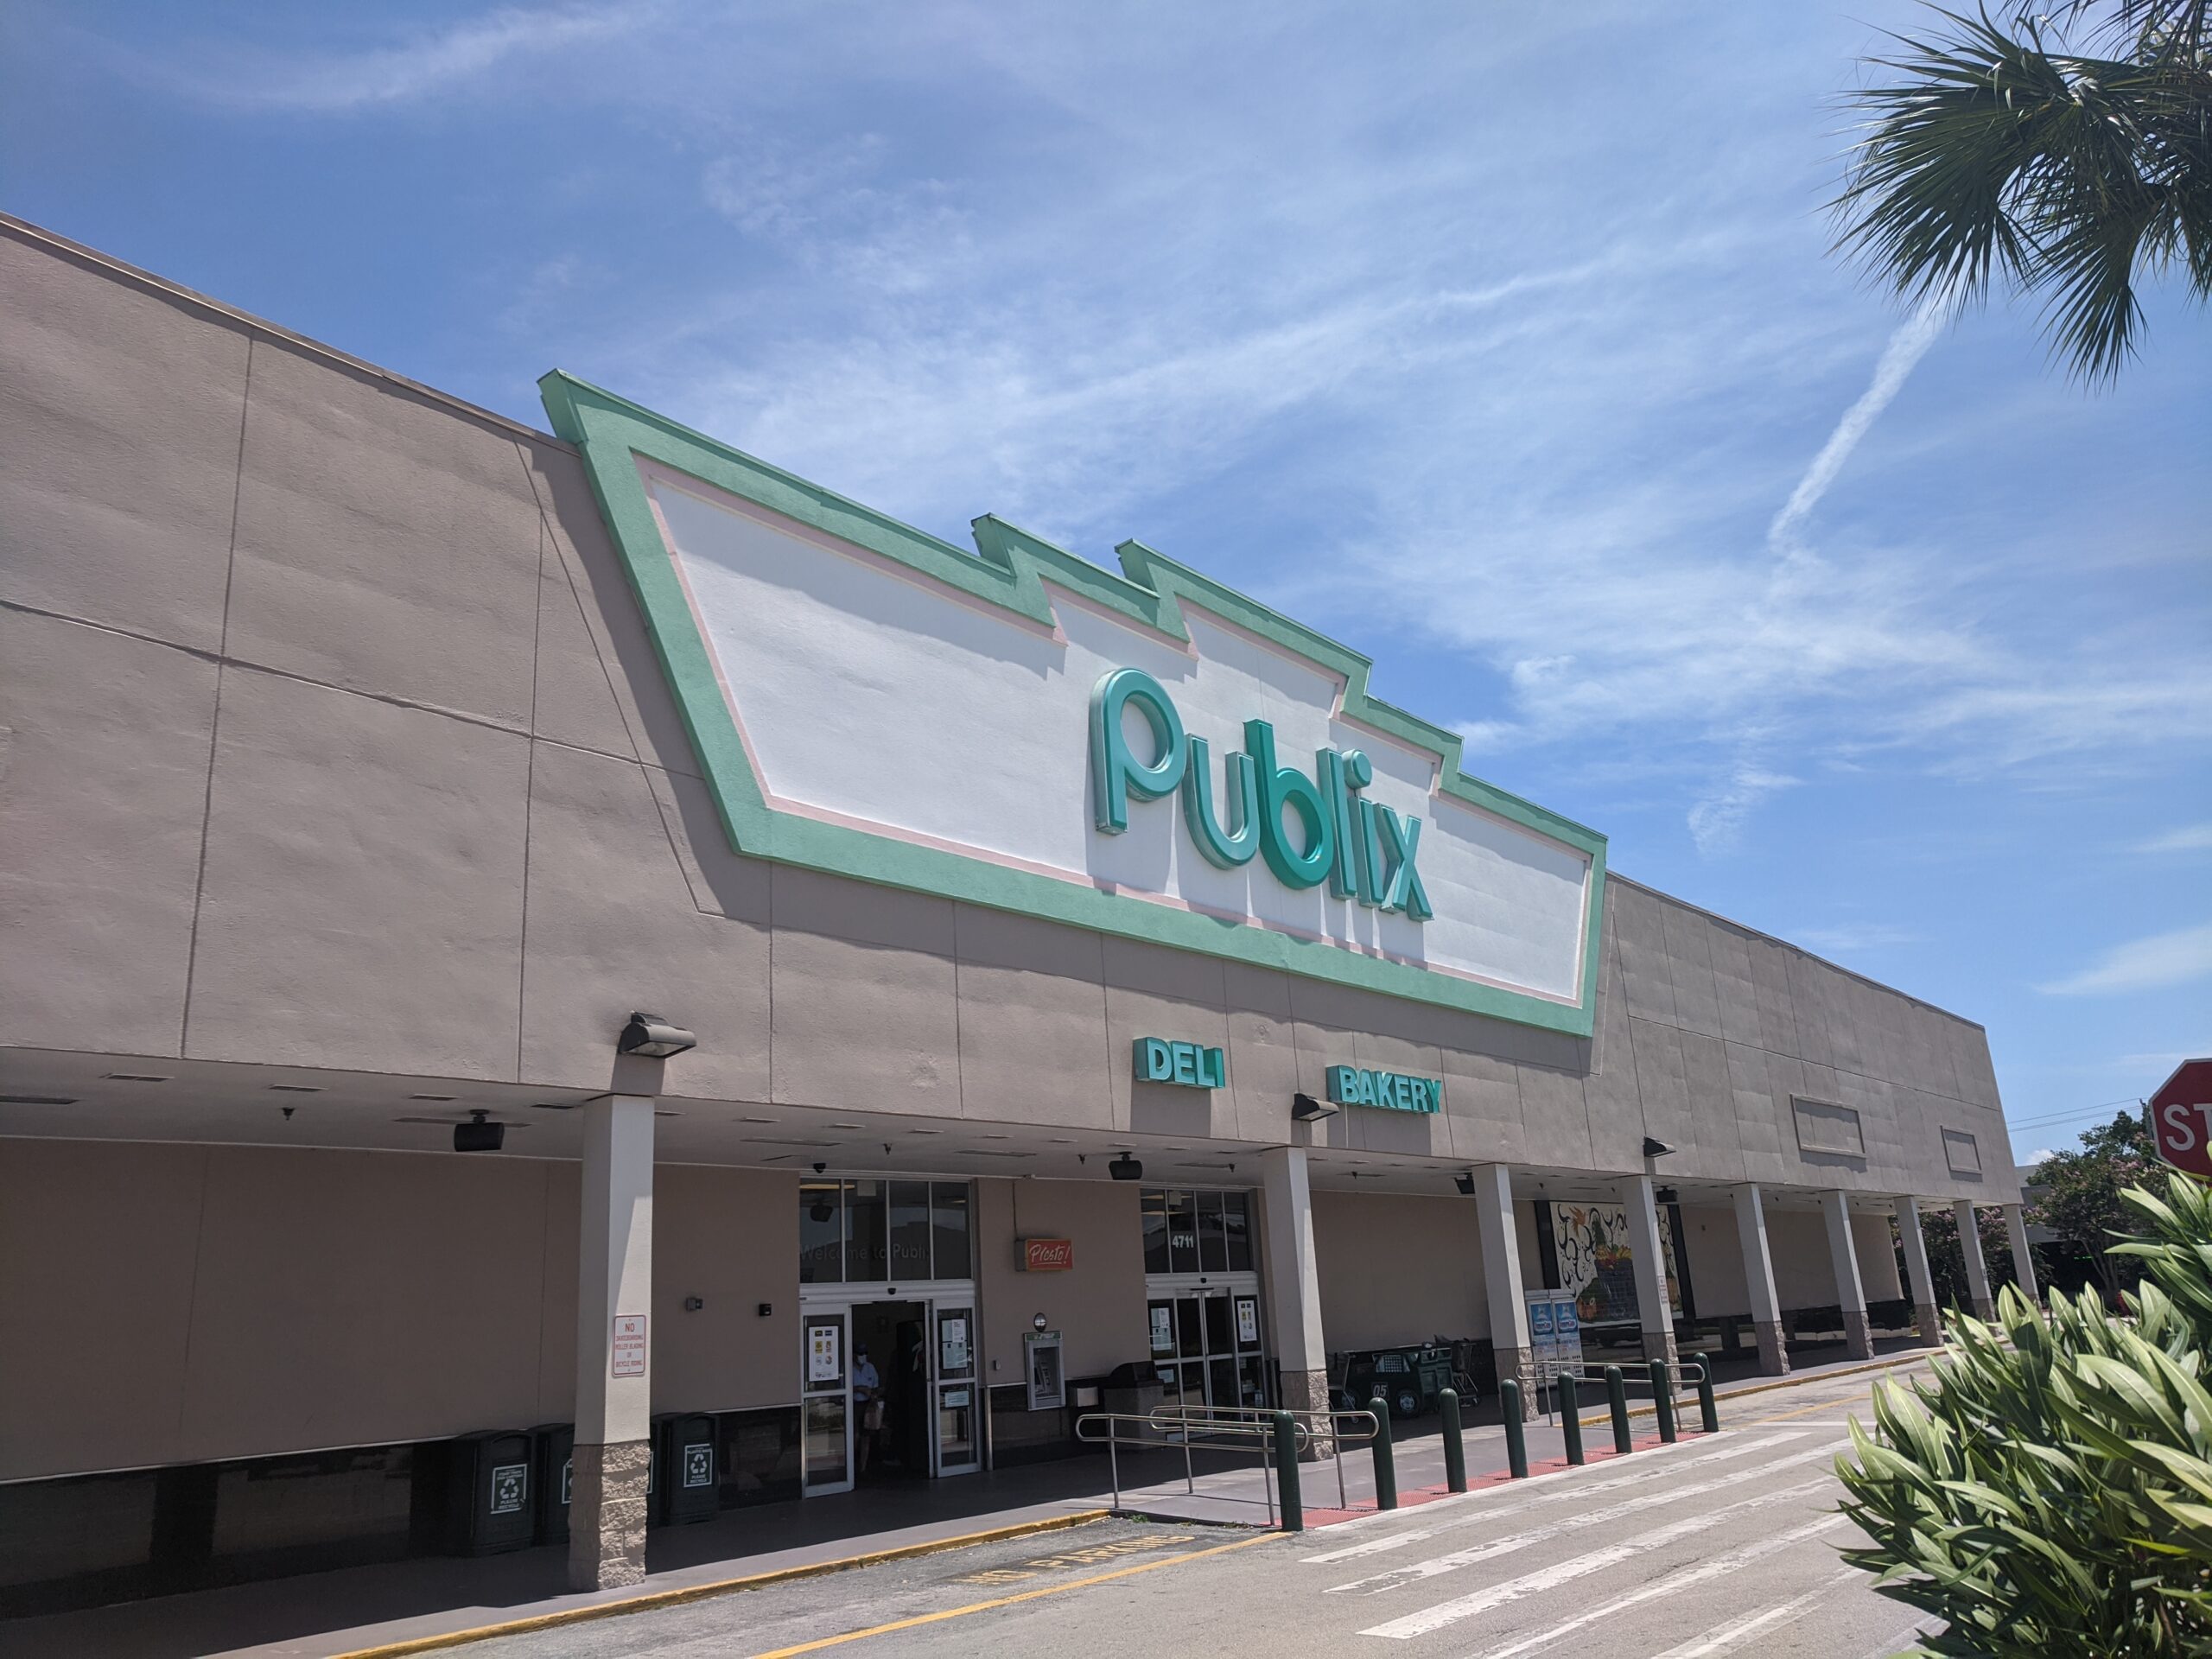 What time does publix deli close? Get the most updated info